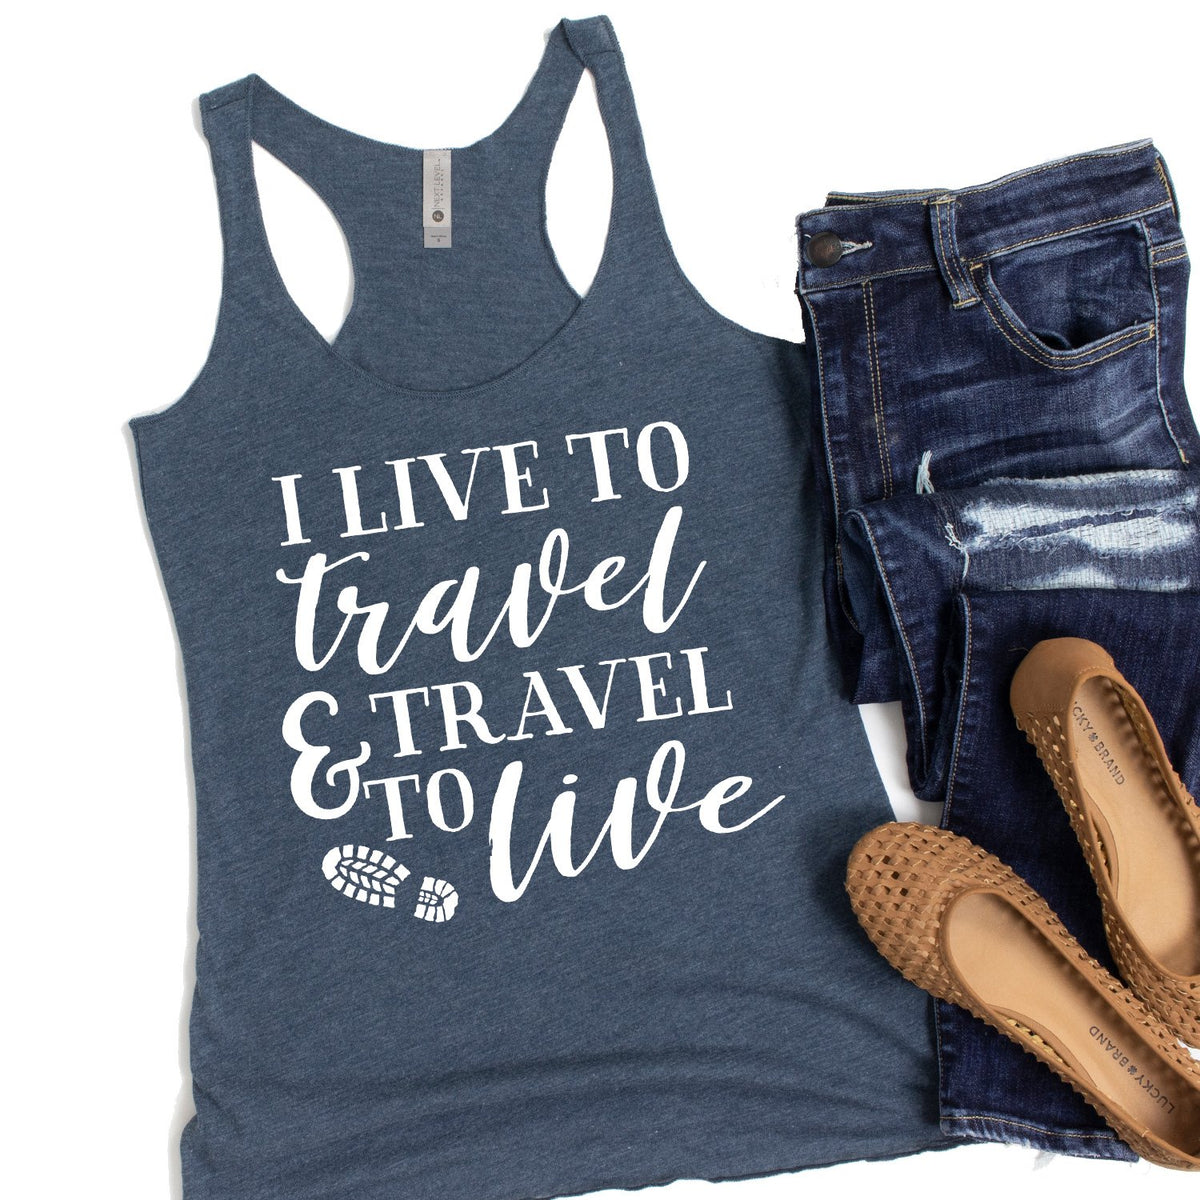 I Live to Travel &amp; Travel to Live - Tank Top Racerback